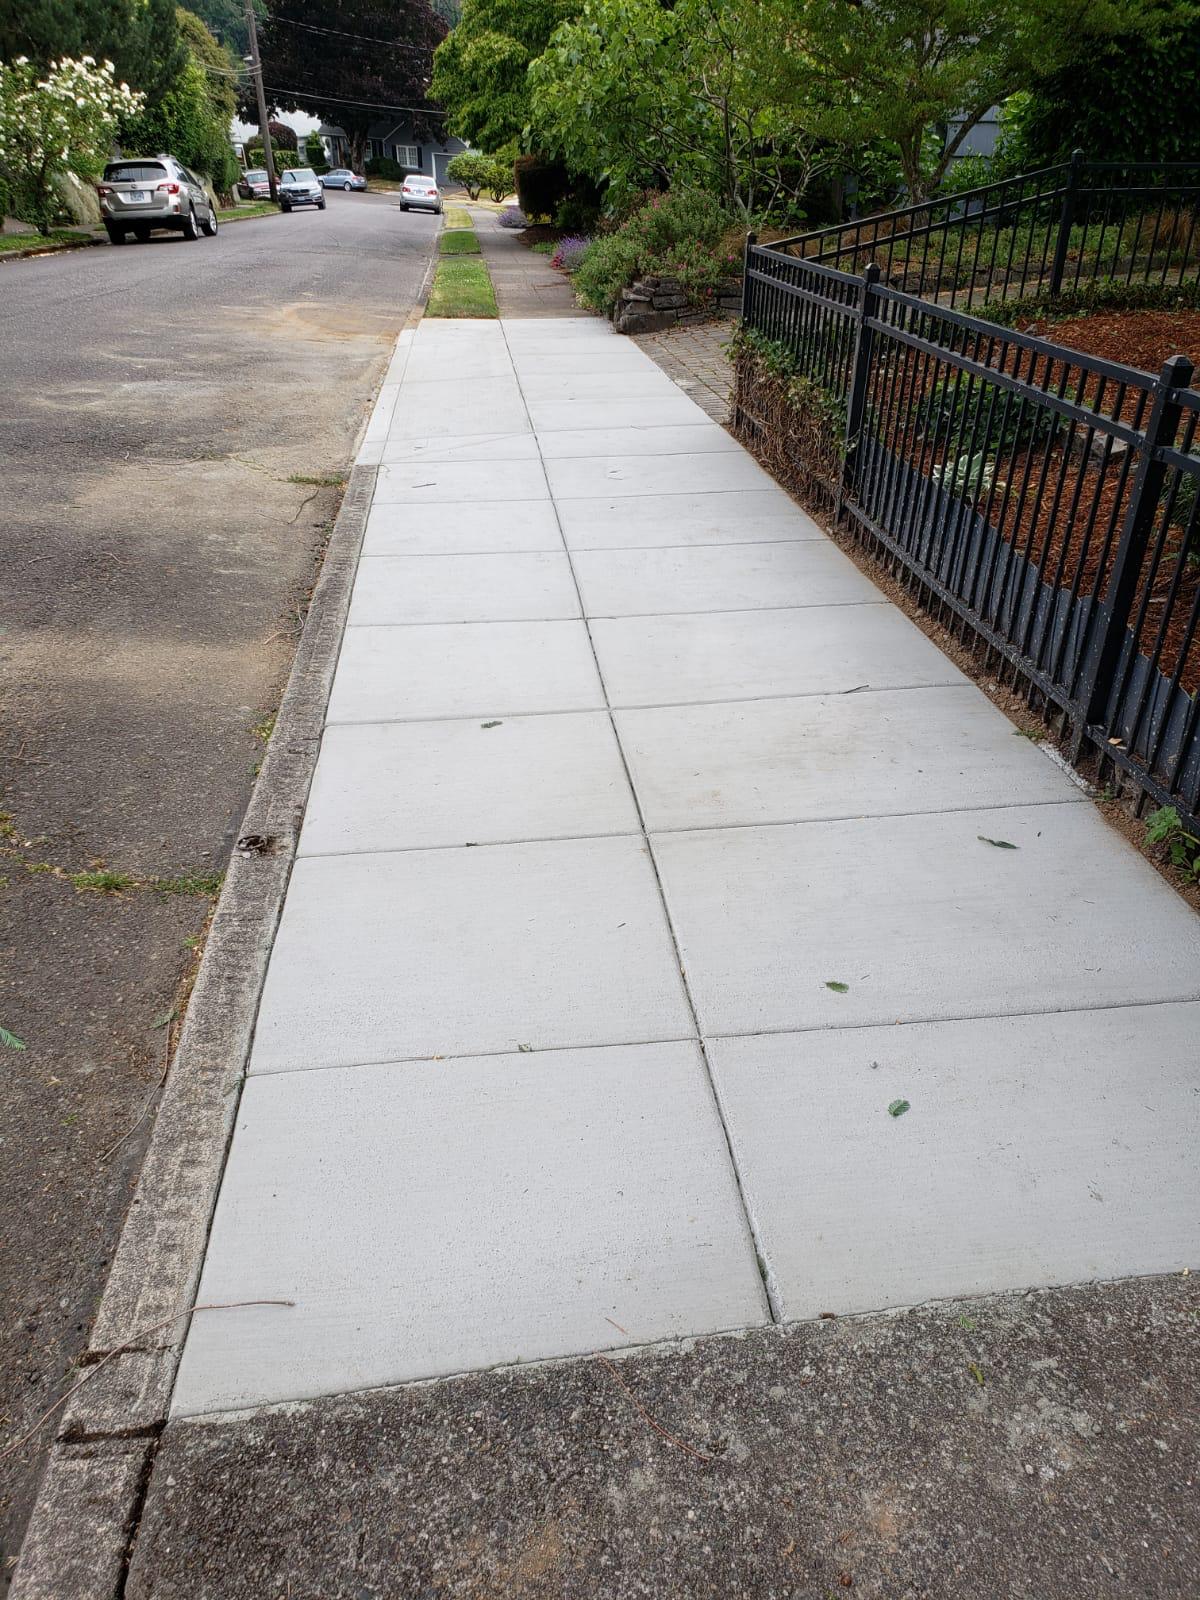 Concrete Sidewalks: A Versatile and Durable Material for Urban Environments